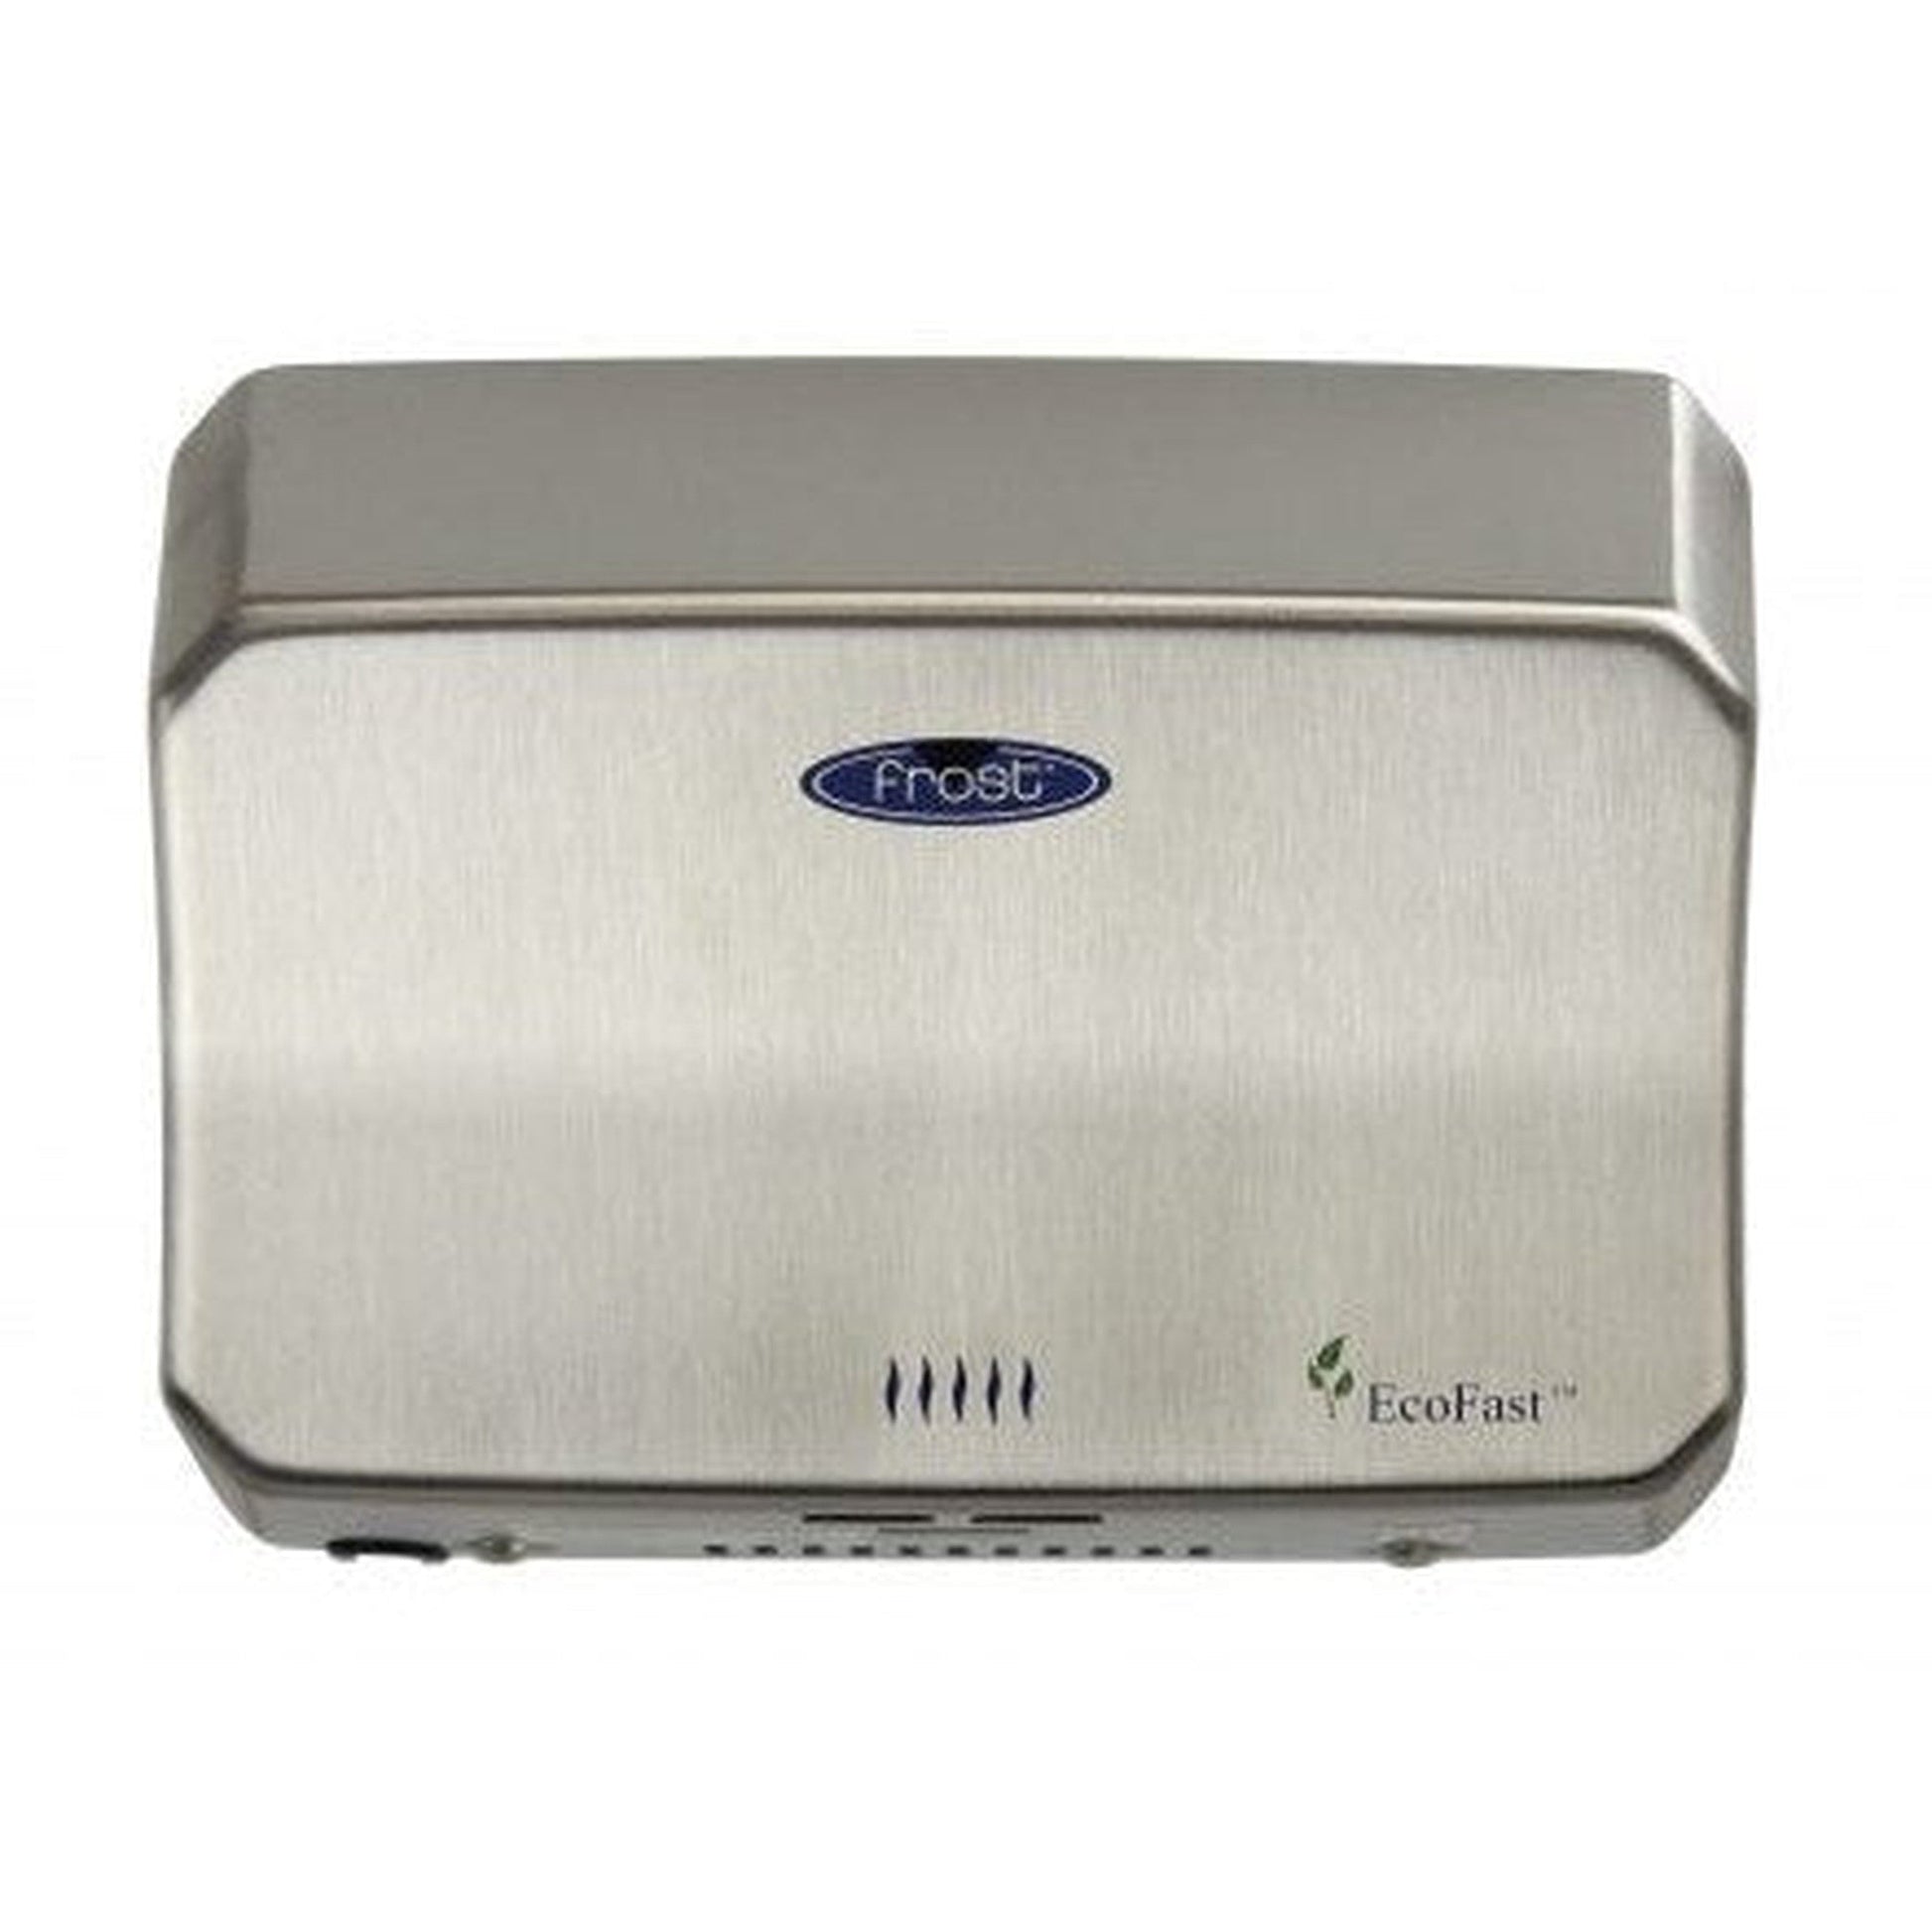 Frost 10.75 x 4 x 8.25 Stainless Steel Brushed Hand Dryer